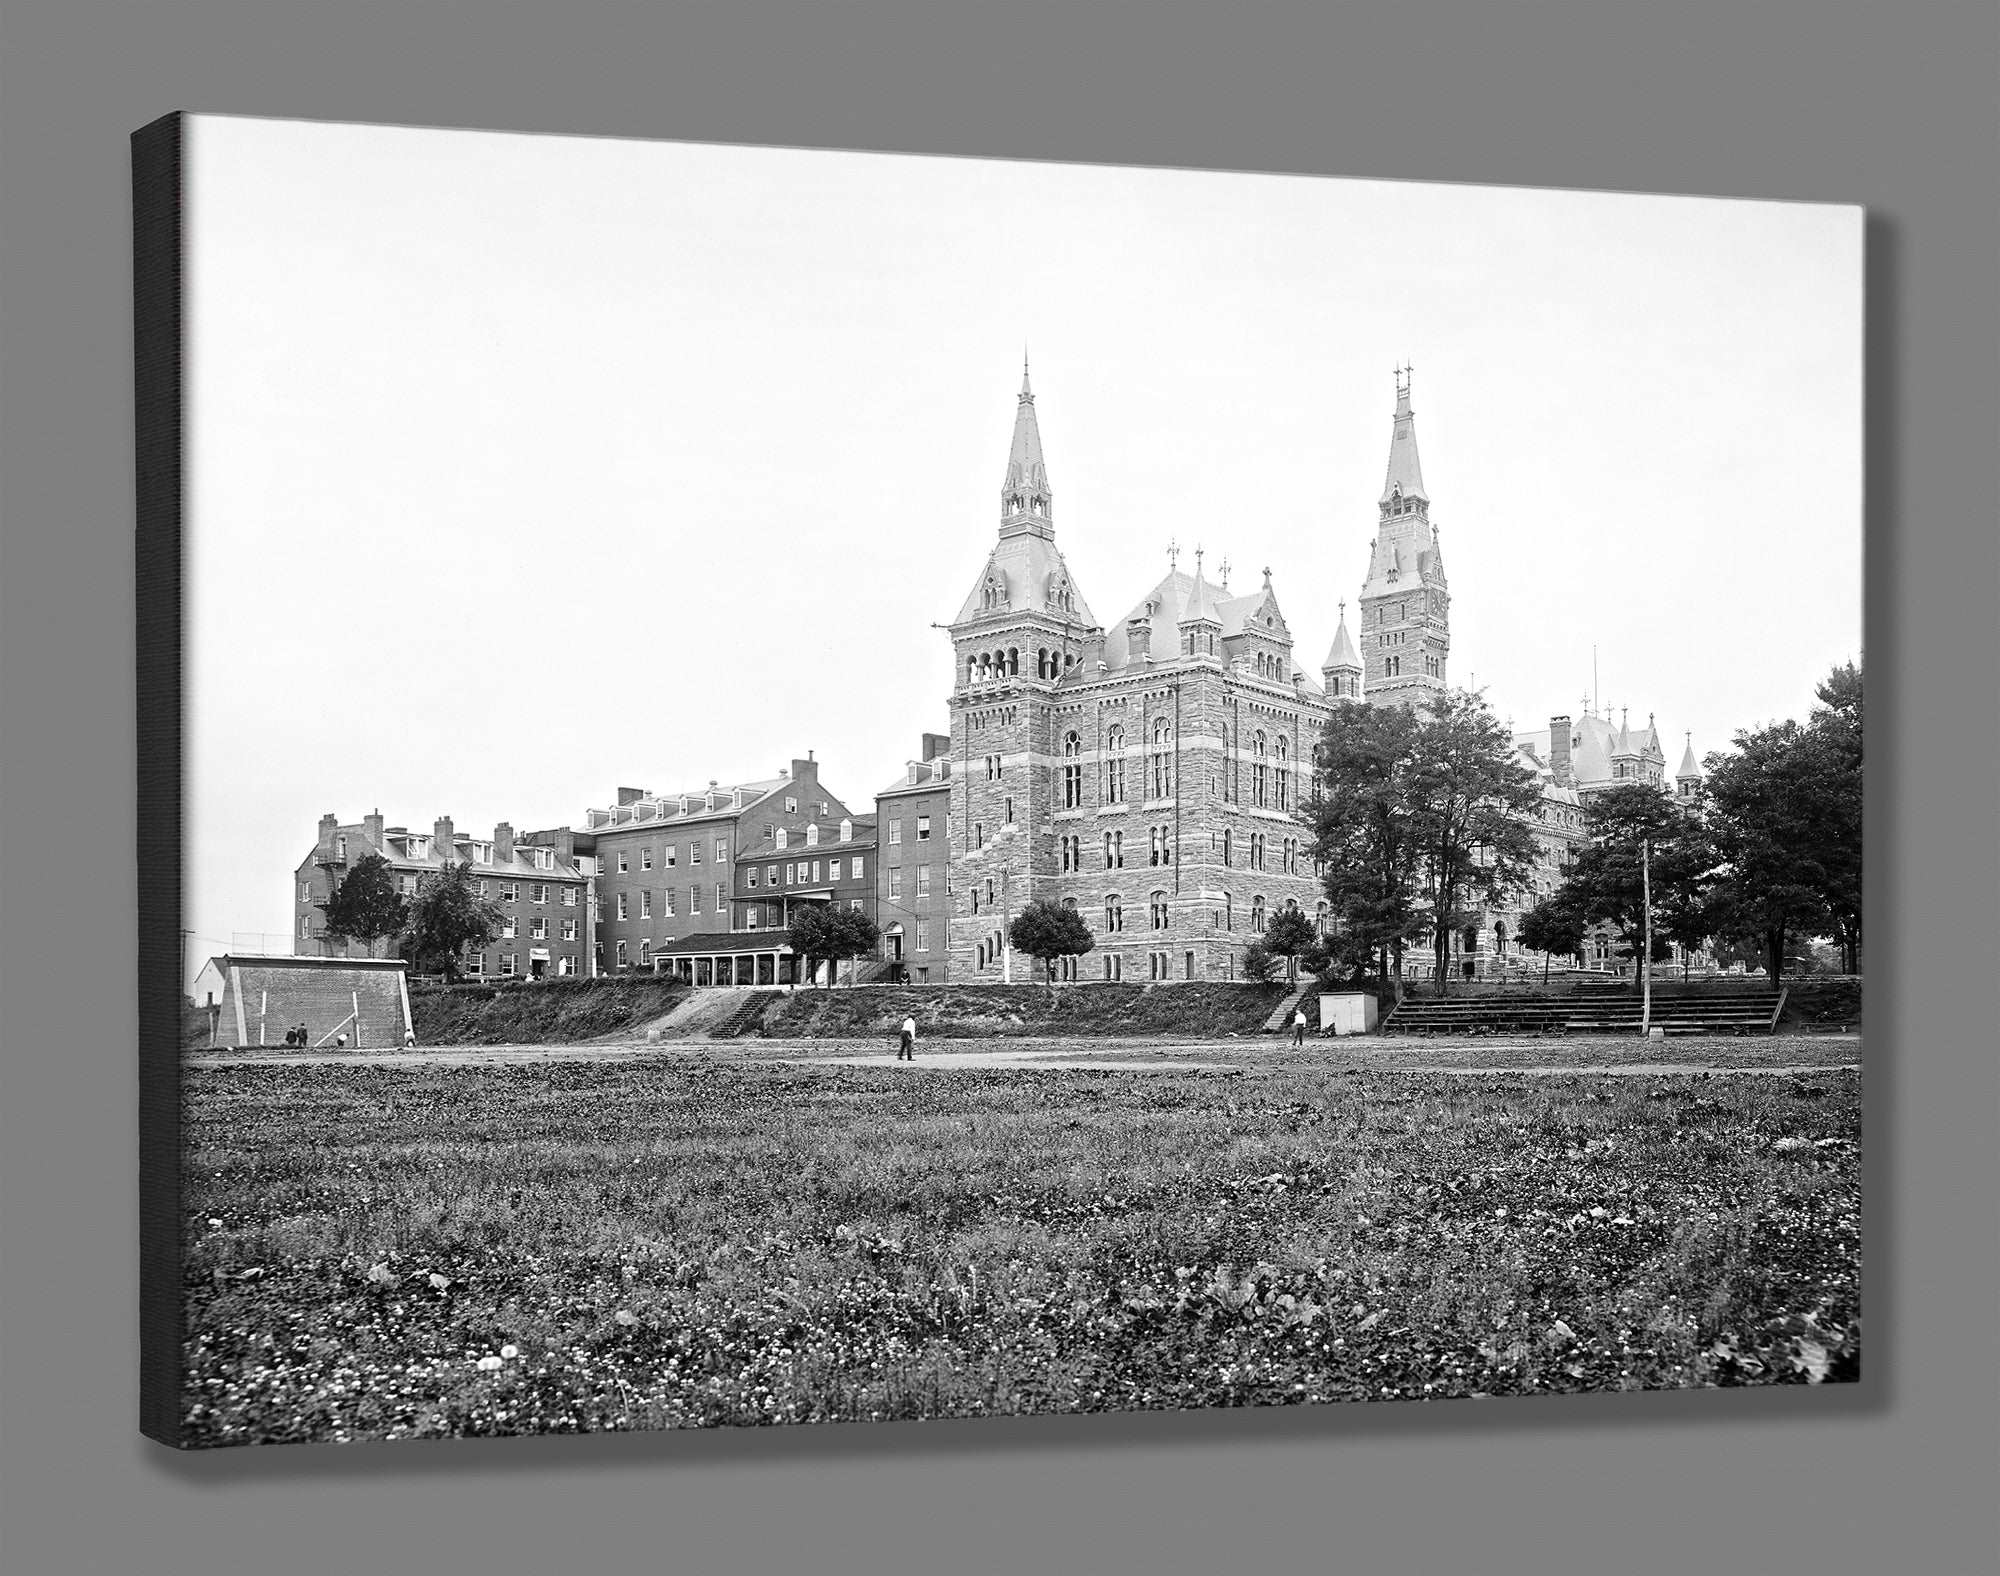 A fine art canvas print reproduction of a vintage image of Georgetown University